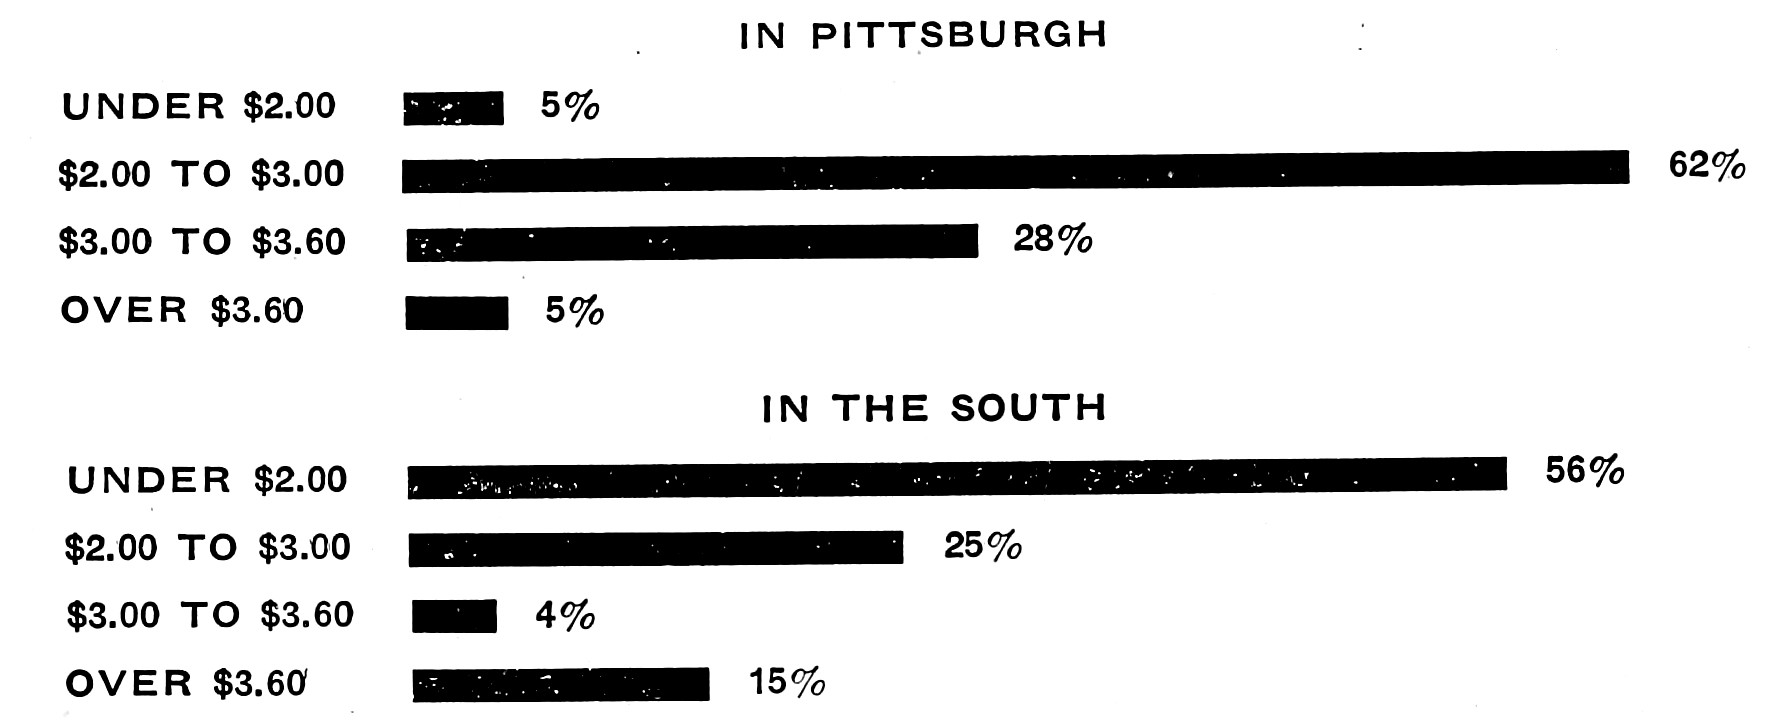 Table displaying wages earned in Pittsburgh versus the South